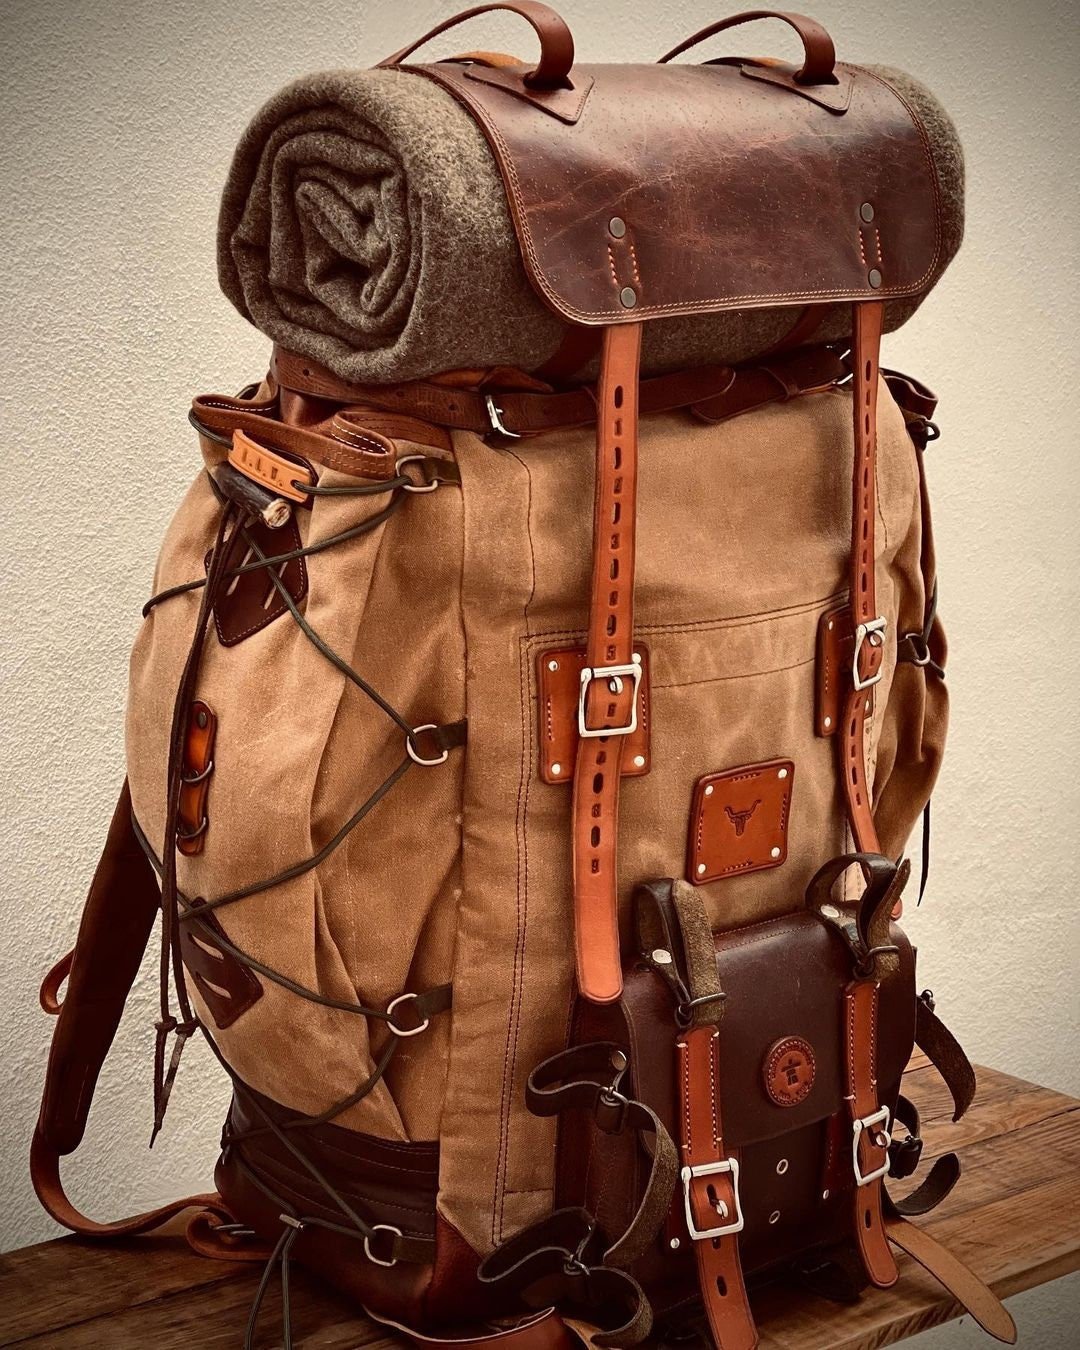 Model Name : Babylon Beige | Custom Leather-Canvas Backpack with Leather Flap, You can Redesign-Customize the item | 30 Liter to 80 Liter Options (Many variants Photos)) bushcraft - camping - hiking backpack 99percenthandmade   